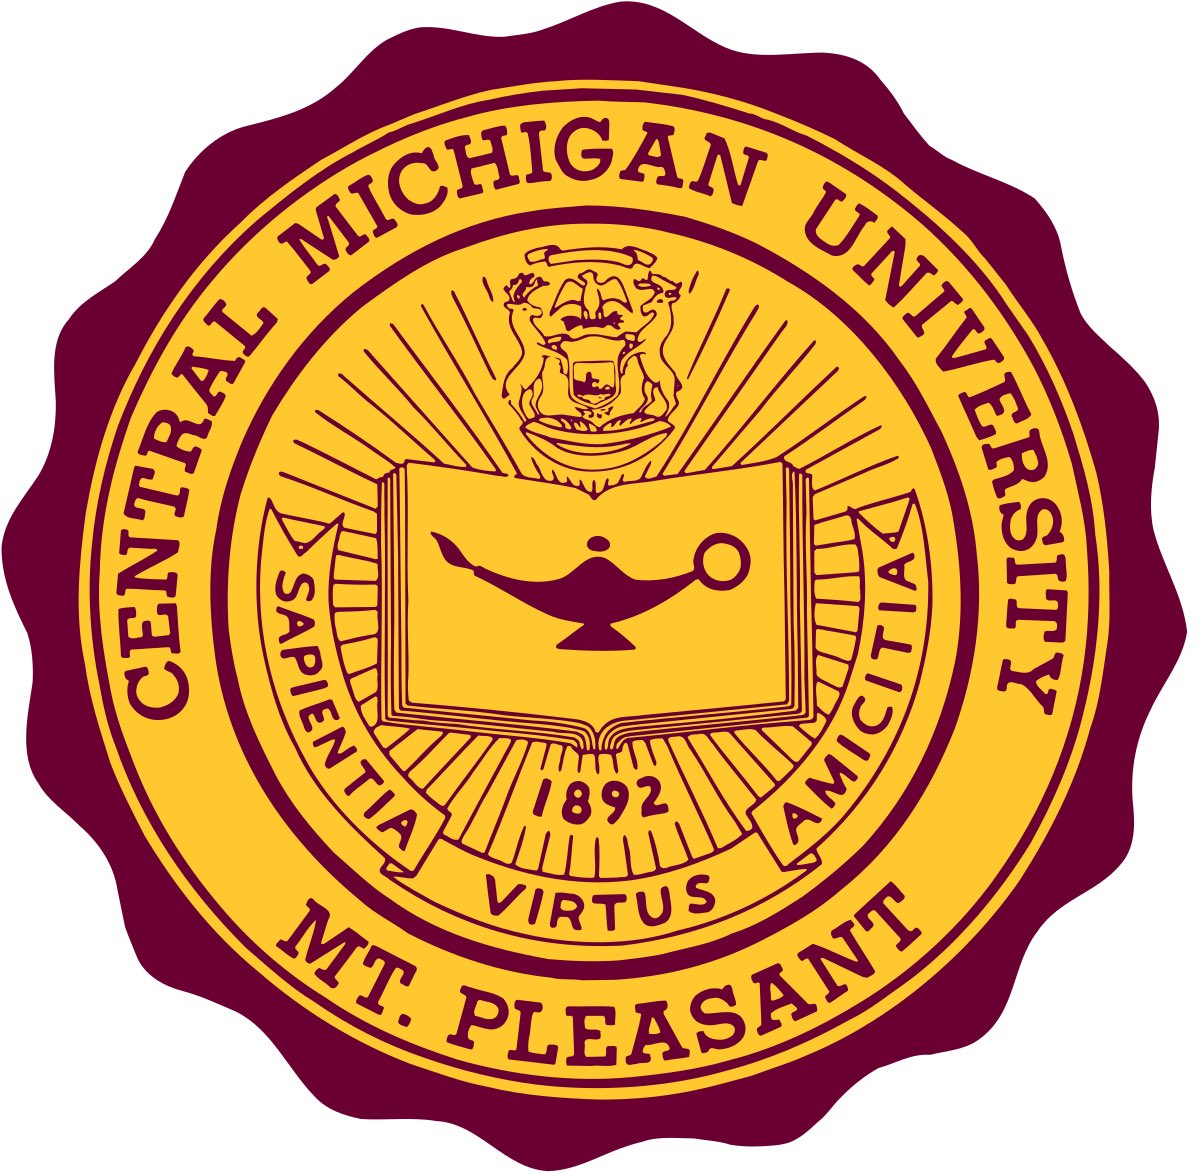 Blessed to announce that this fall I will be attending Central Michigan University! I want to thank all my teachers and counselors who have helped me through this journey. #CMU24 #fireupchips